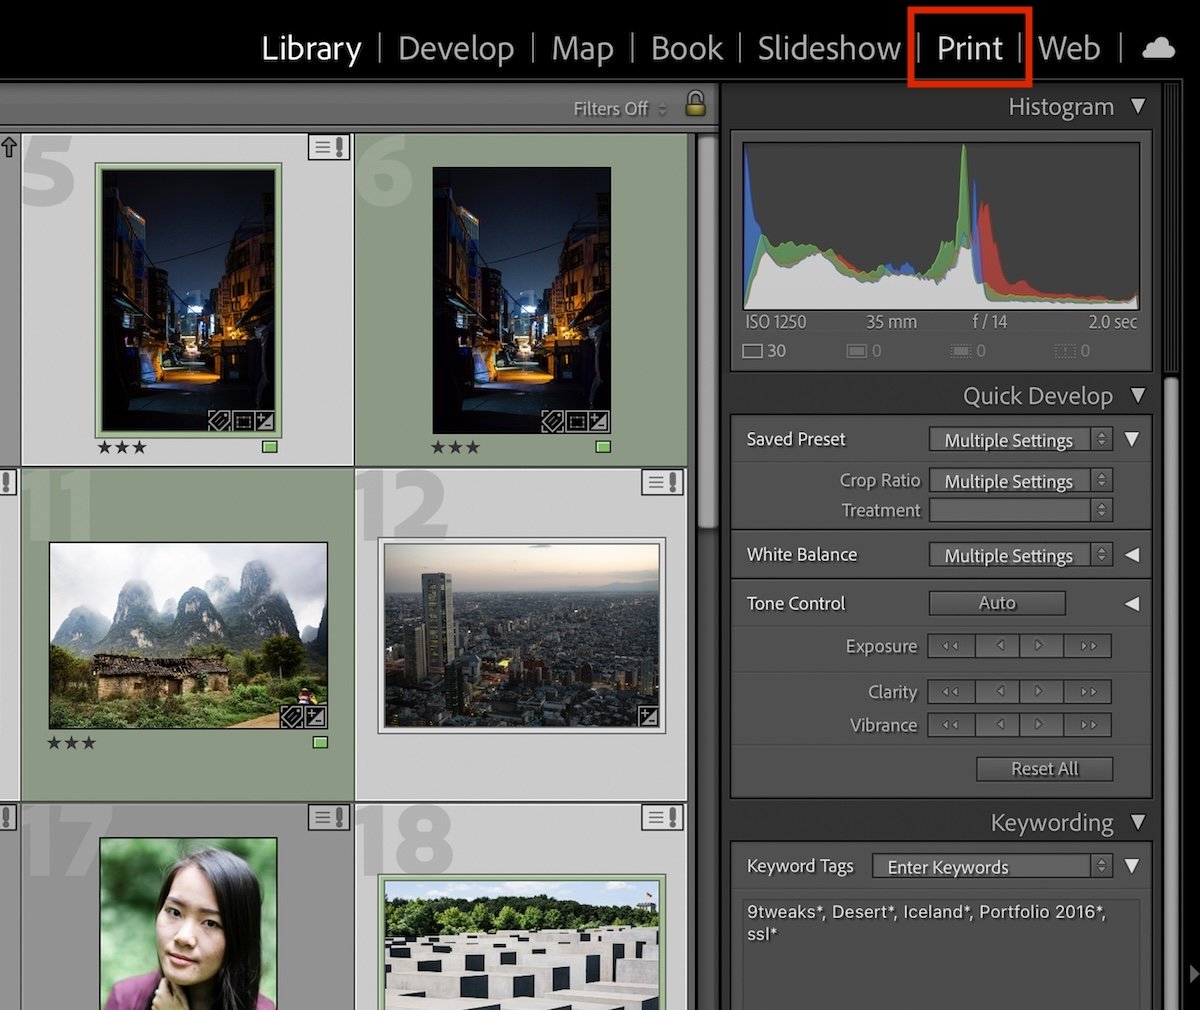 screenshot of the adobe lightroom classic interface showing top menu modules with print in a red box